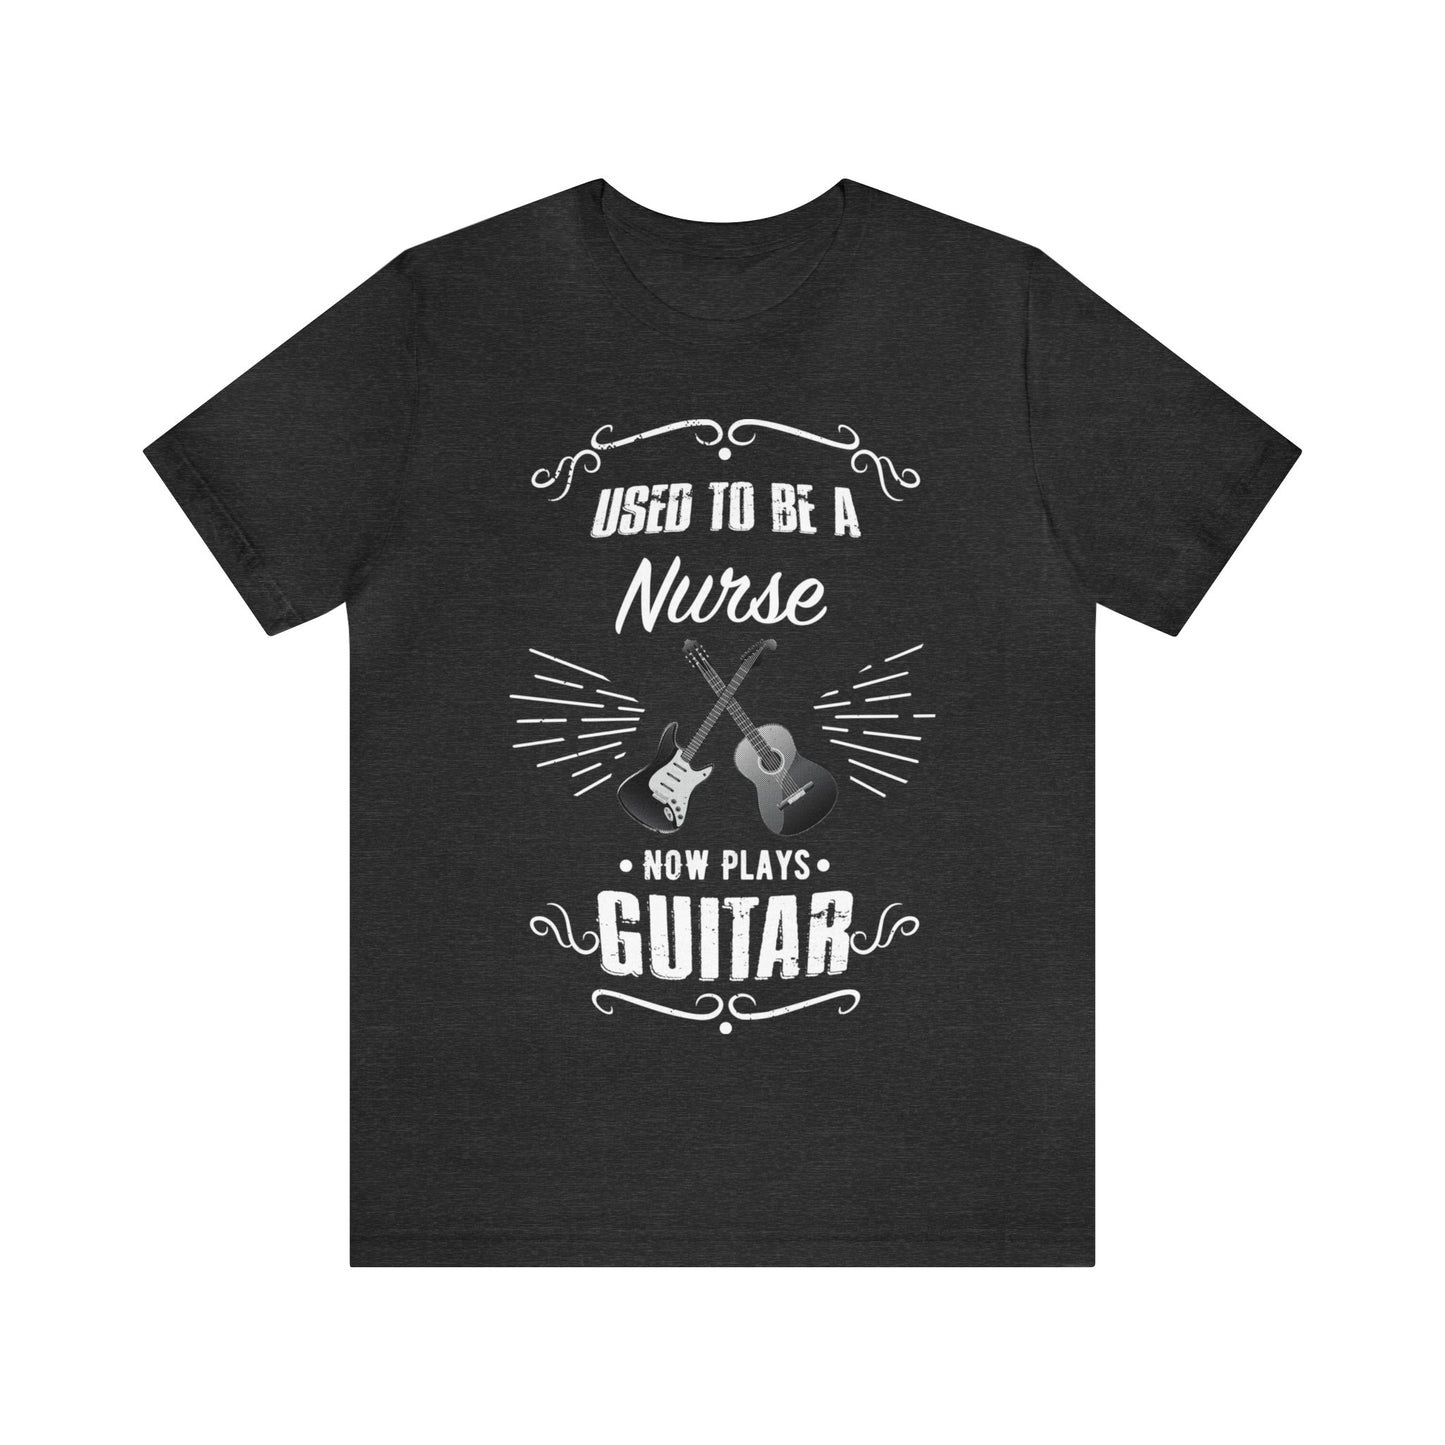 Used to be a NURSE; Now Plays GUITAR - Funny Retirement Gift, Unisex T-shirt Bella+Canvas 3001, dark shirt colors for amateur musician/guitar player